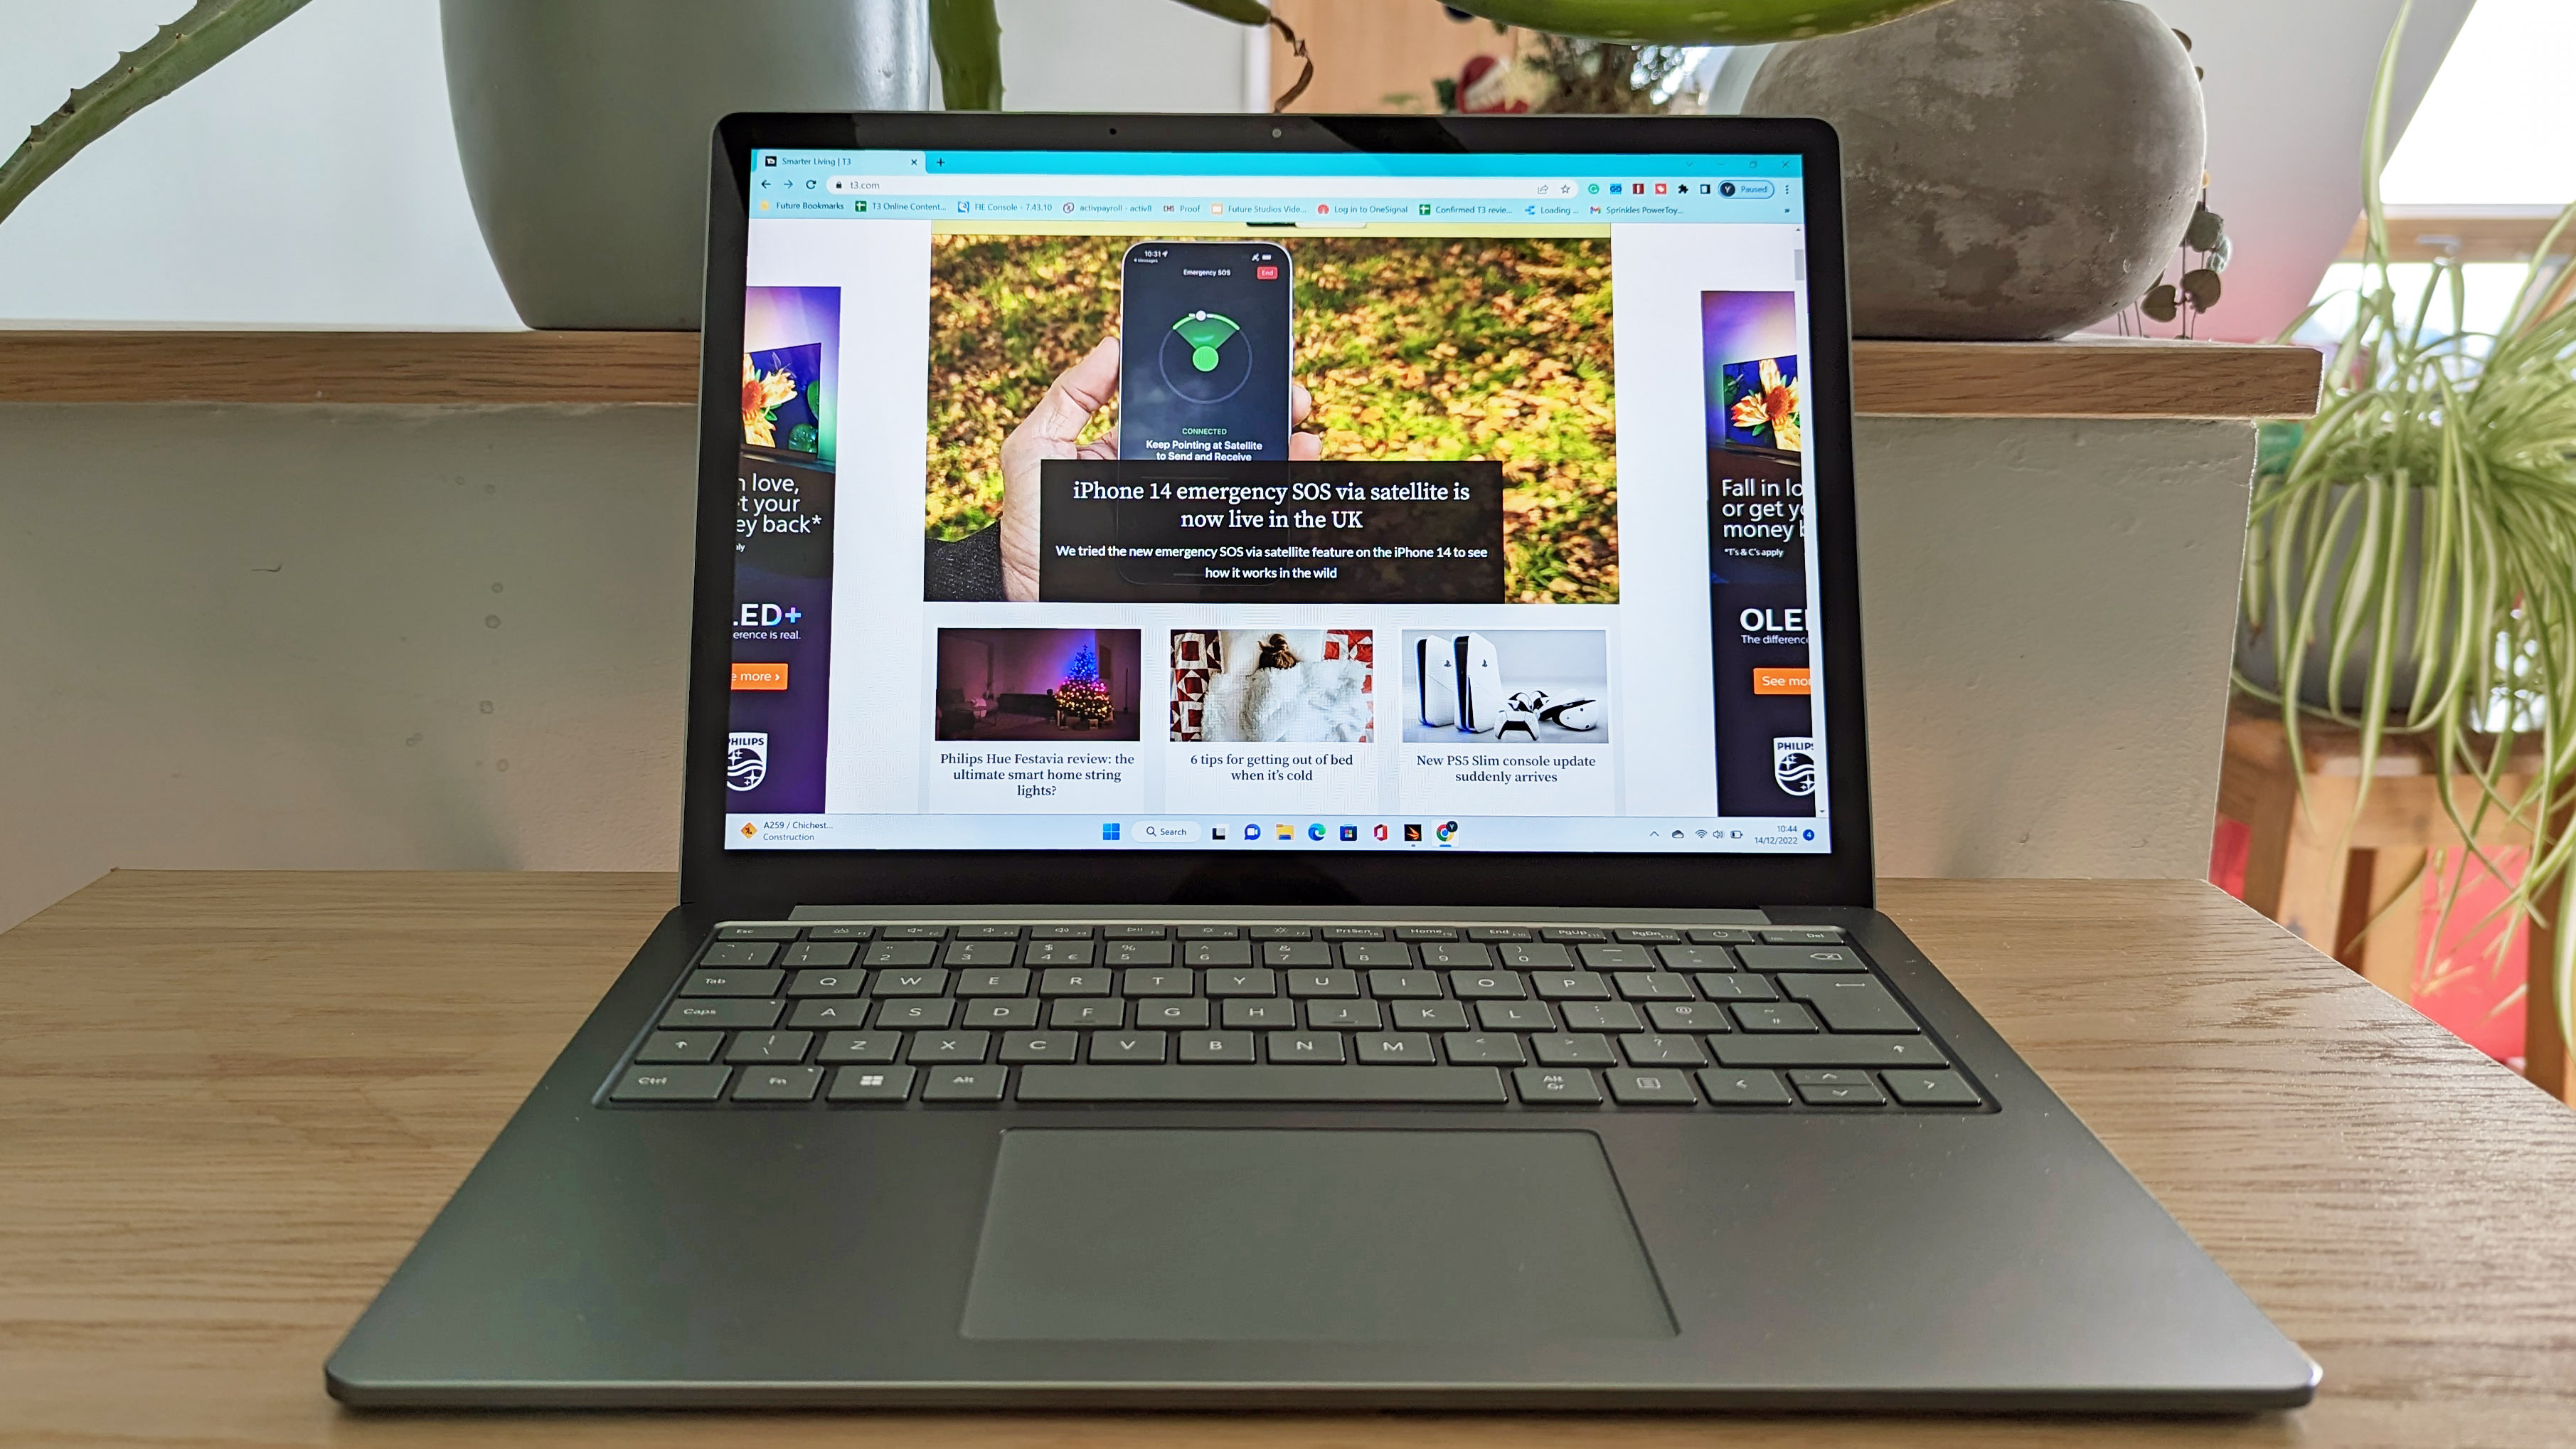 Microsoft Surface Laptop 5 with 13.5